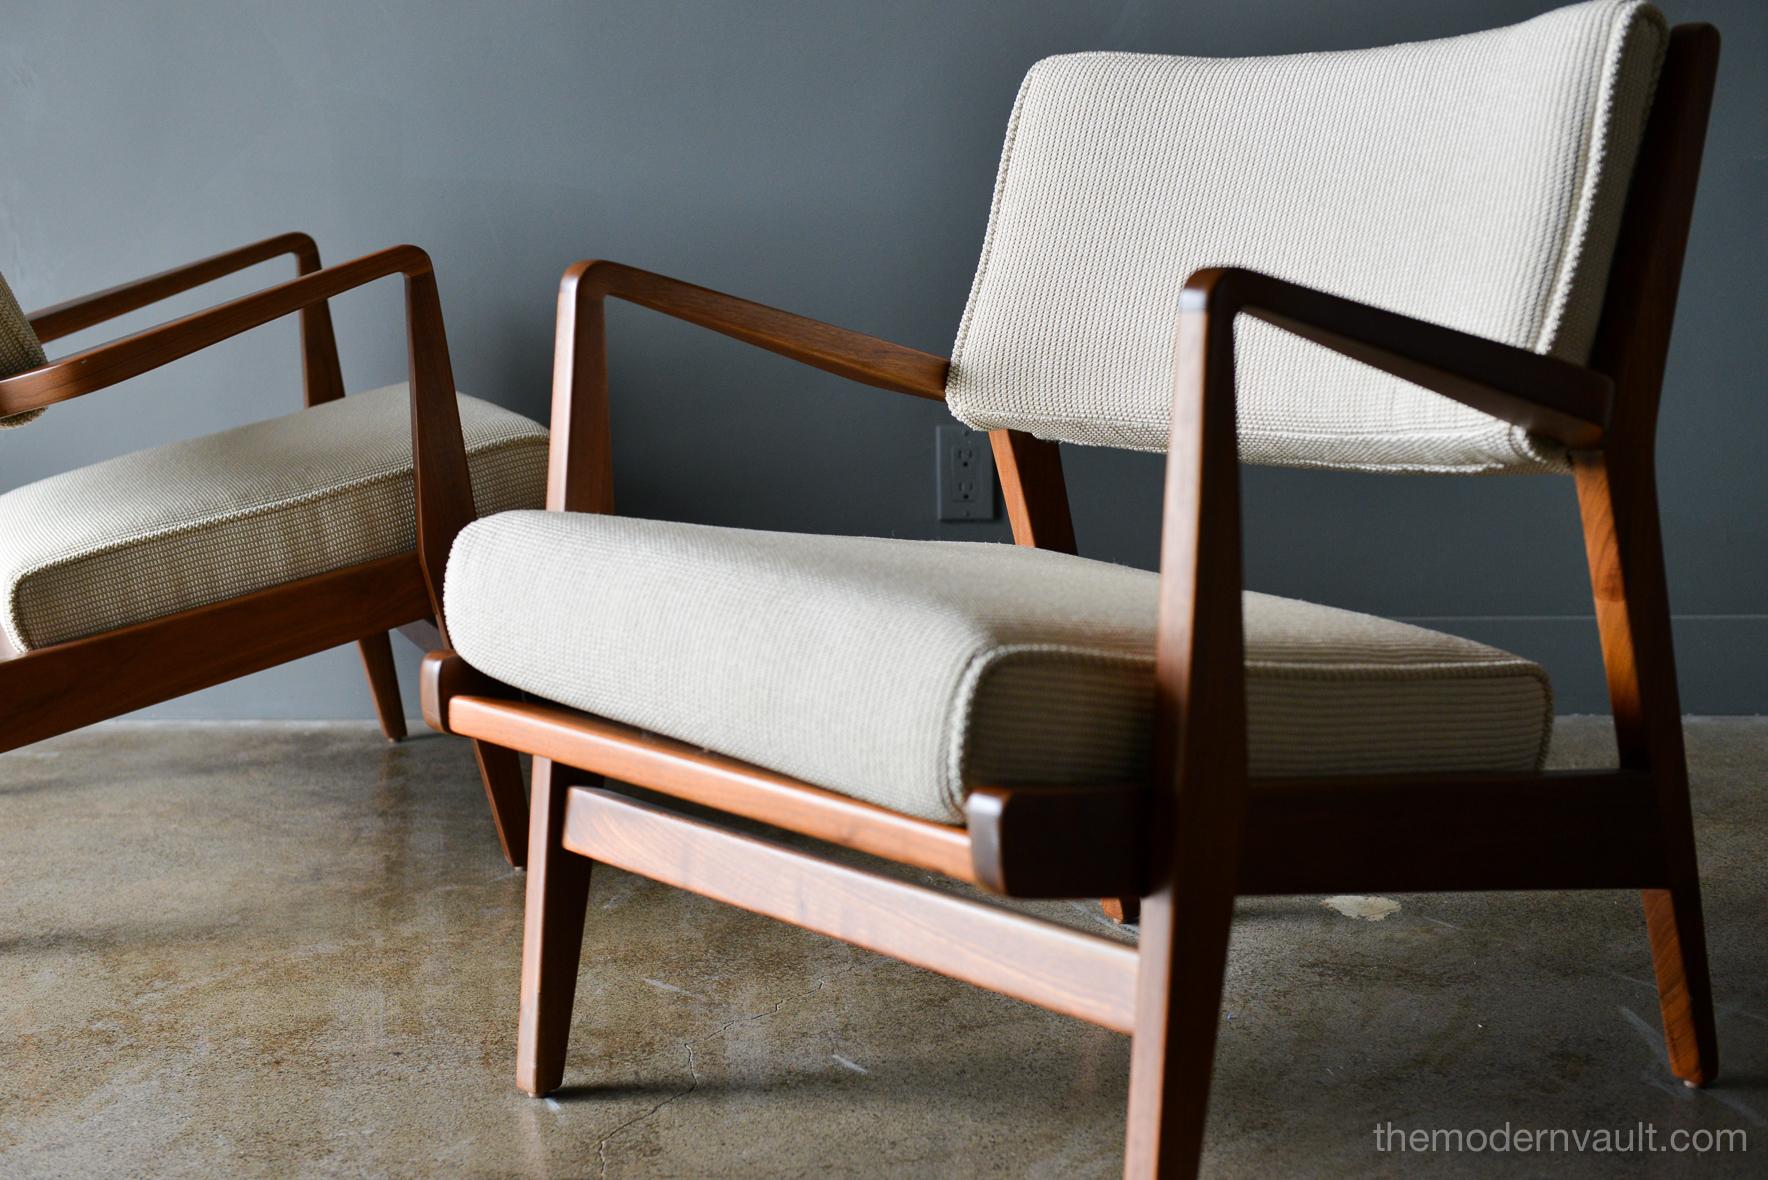 Pair of Jens Risom walnut lounge chairs, circa 1960. Restored walnut frames and new upholstery done in a beautiful woven textured fabric with period correct cushions. Beautiful lines and design, these are classic pieces for your home or